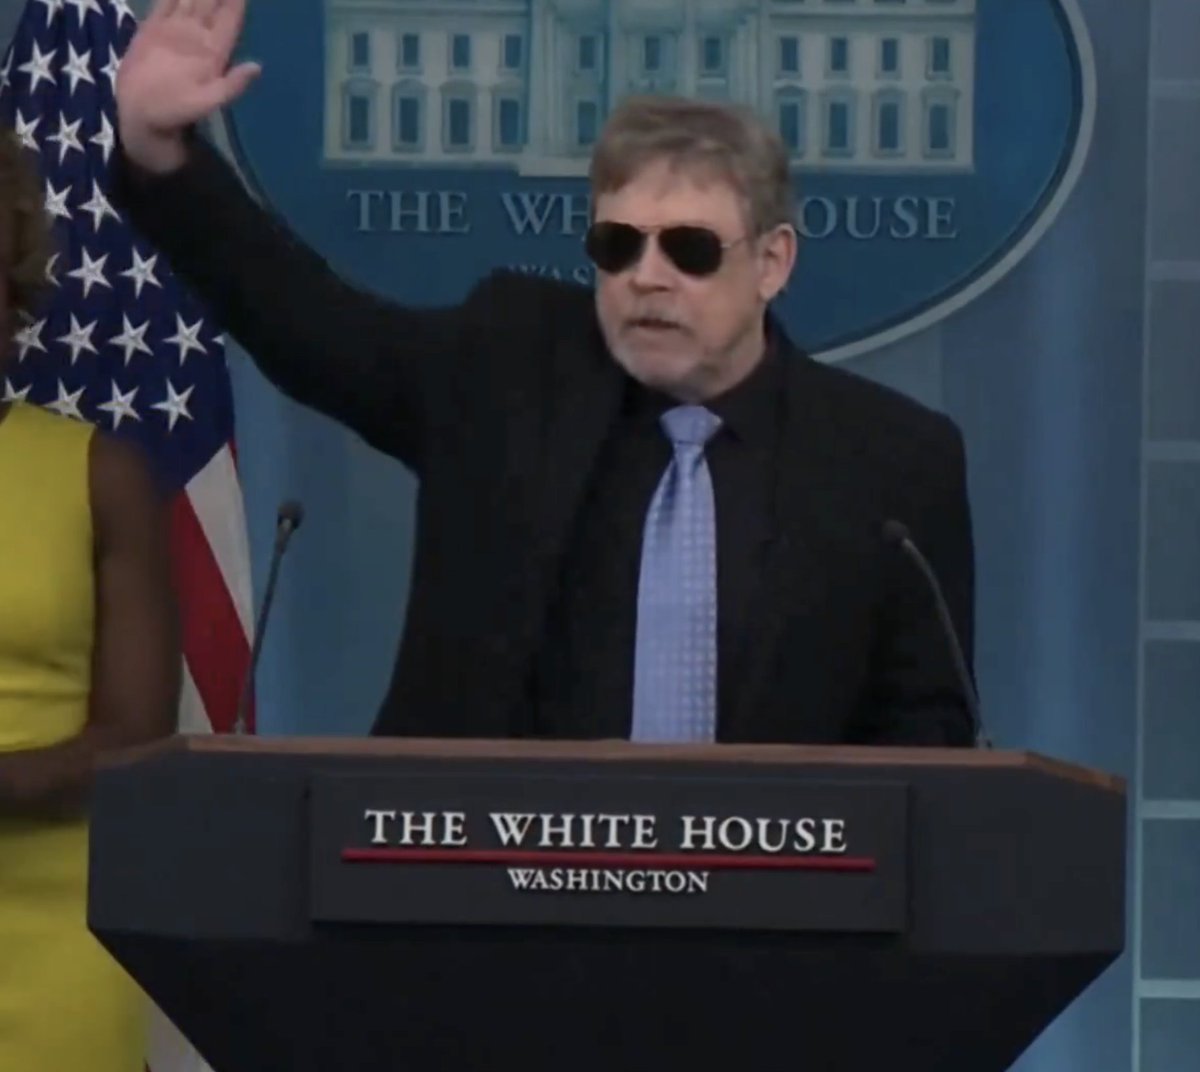 BREAKING: Legendary actor Mark Hamill infuriates MAGA world by making a surprise appearance at the White House press briefing to praise Joe Biden's historic presidency. Luke Skywalker is all in on defeating Donald Trump... 'How many of you had Mark Hamill will lead the press